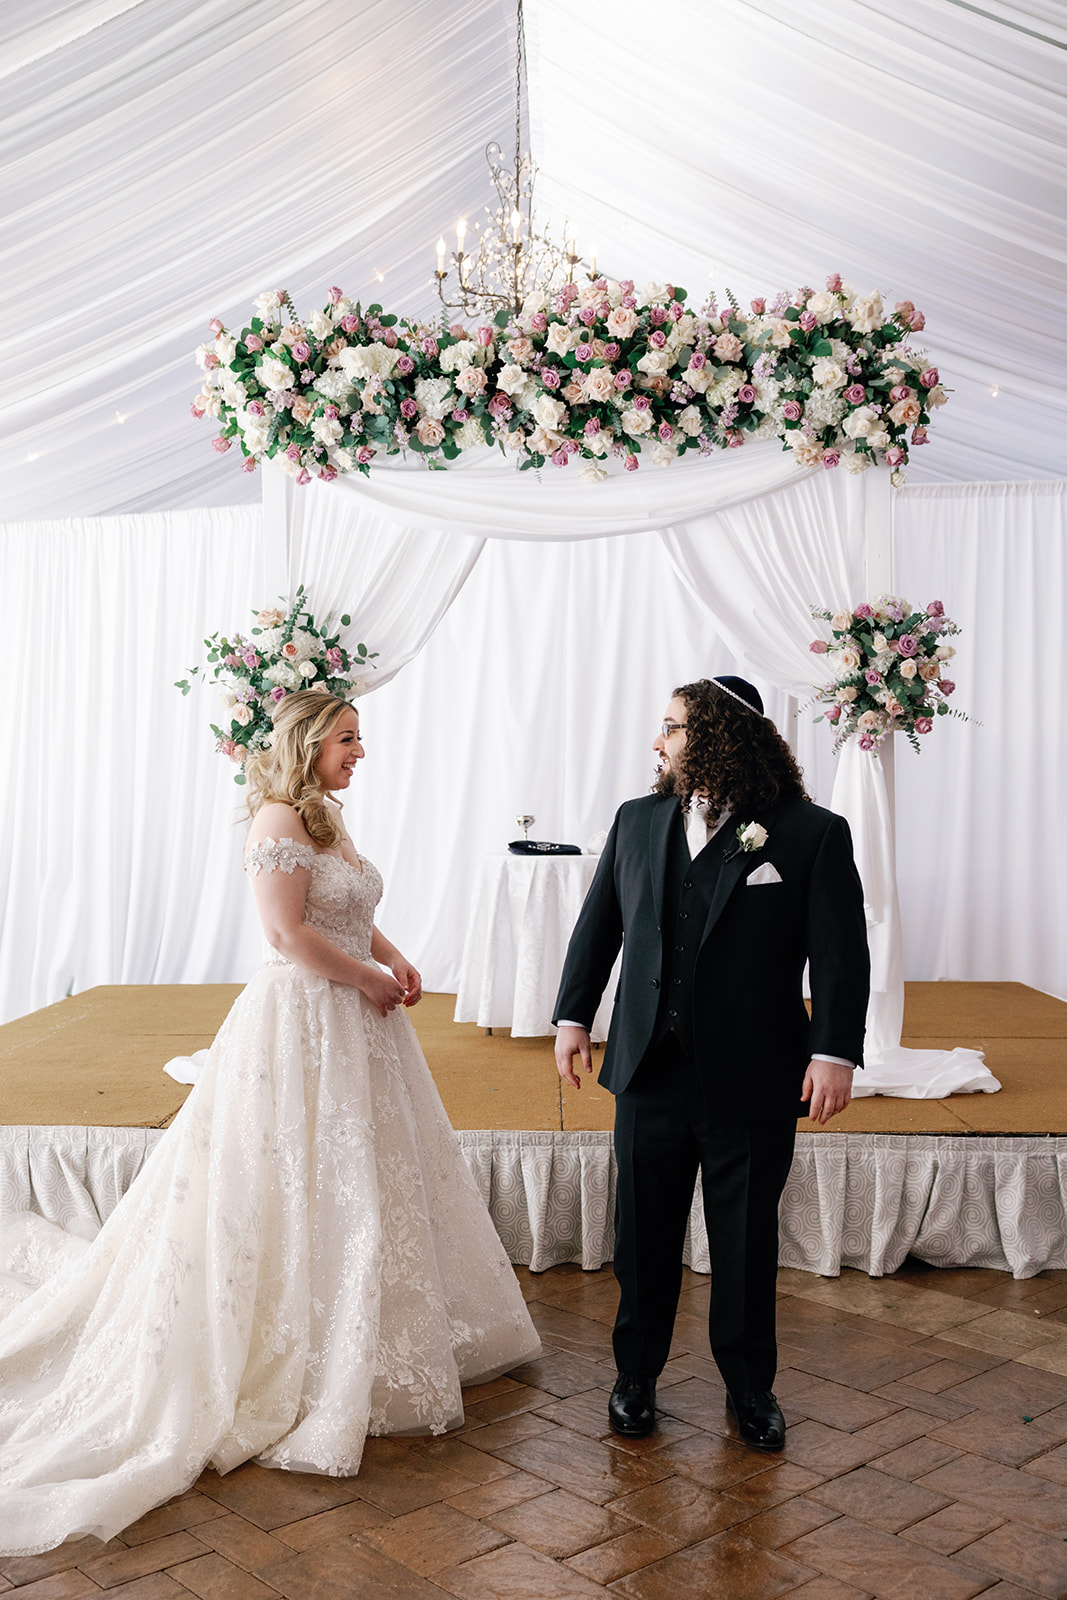 A groom sees his bride for the first time in their ceremony location during a first look